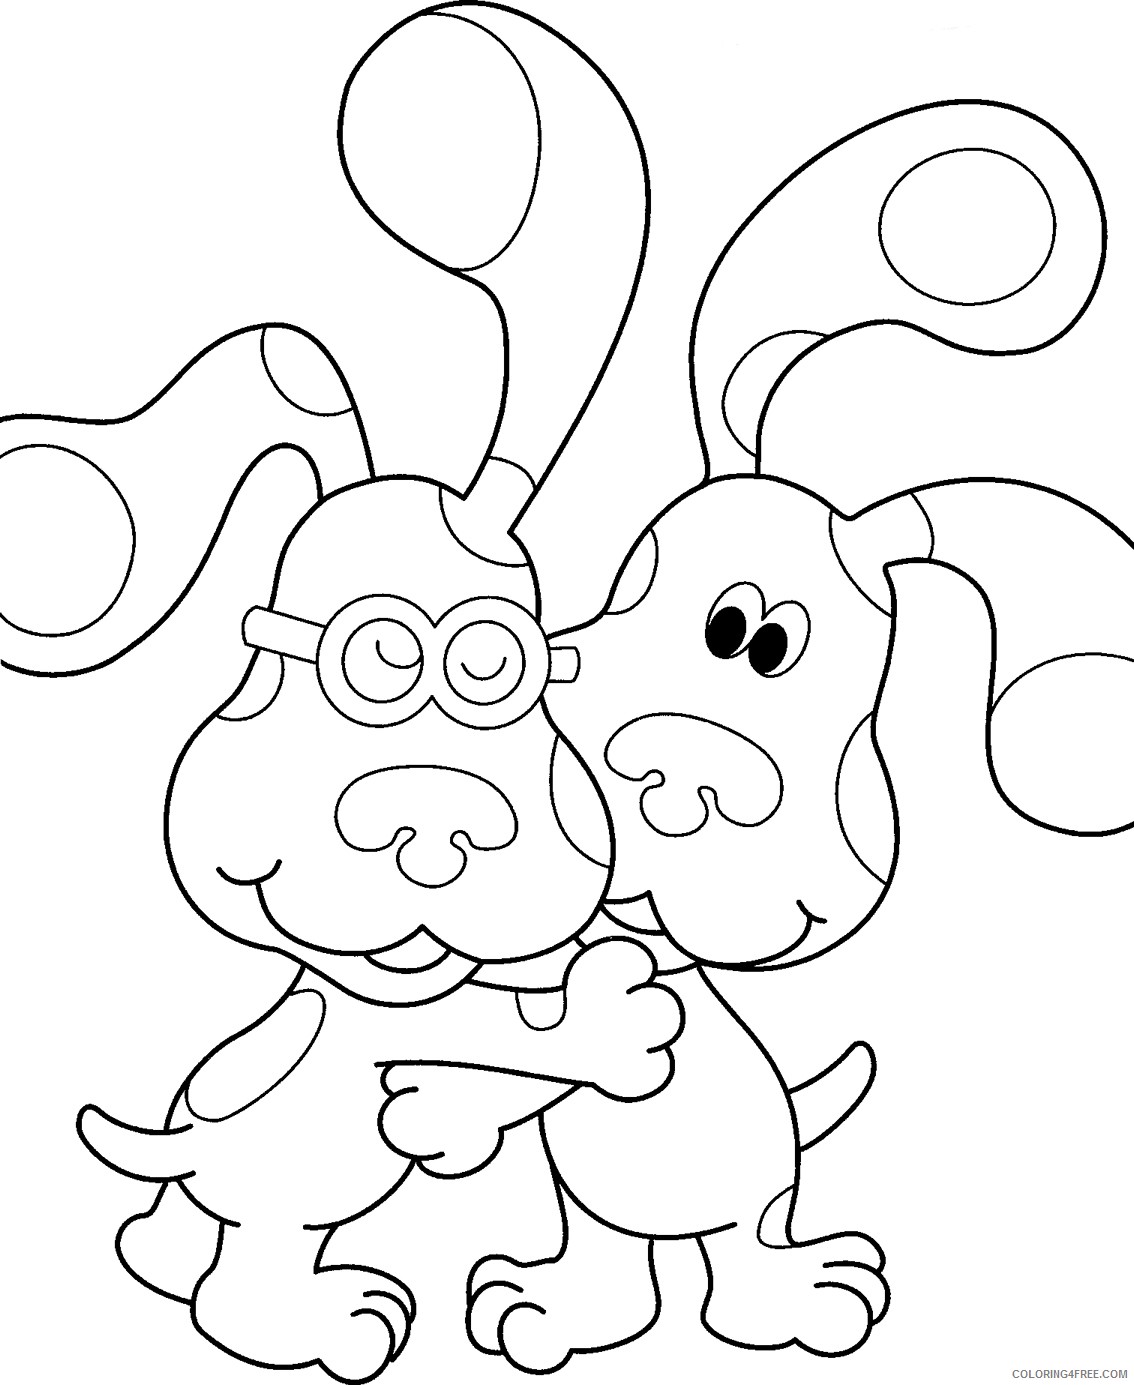 blues clues coloring pages and friend Coloring4free